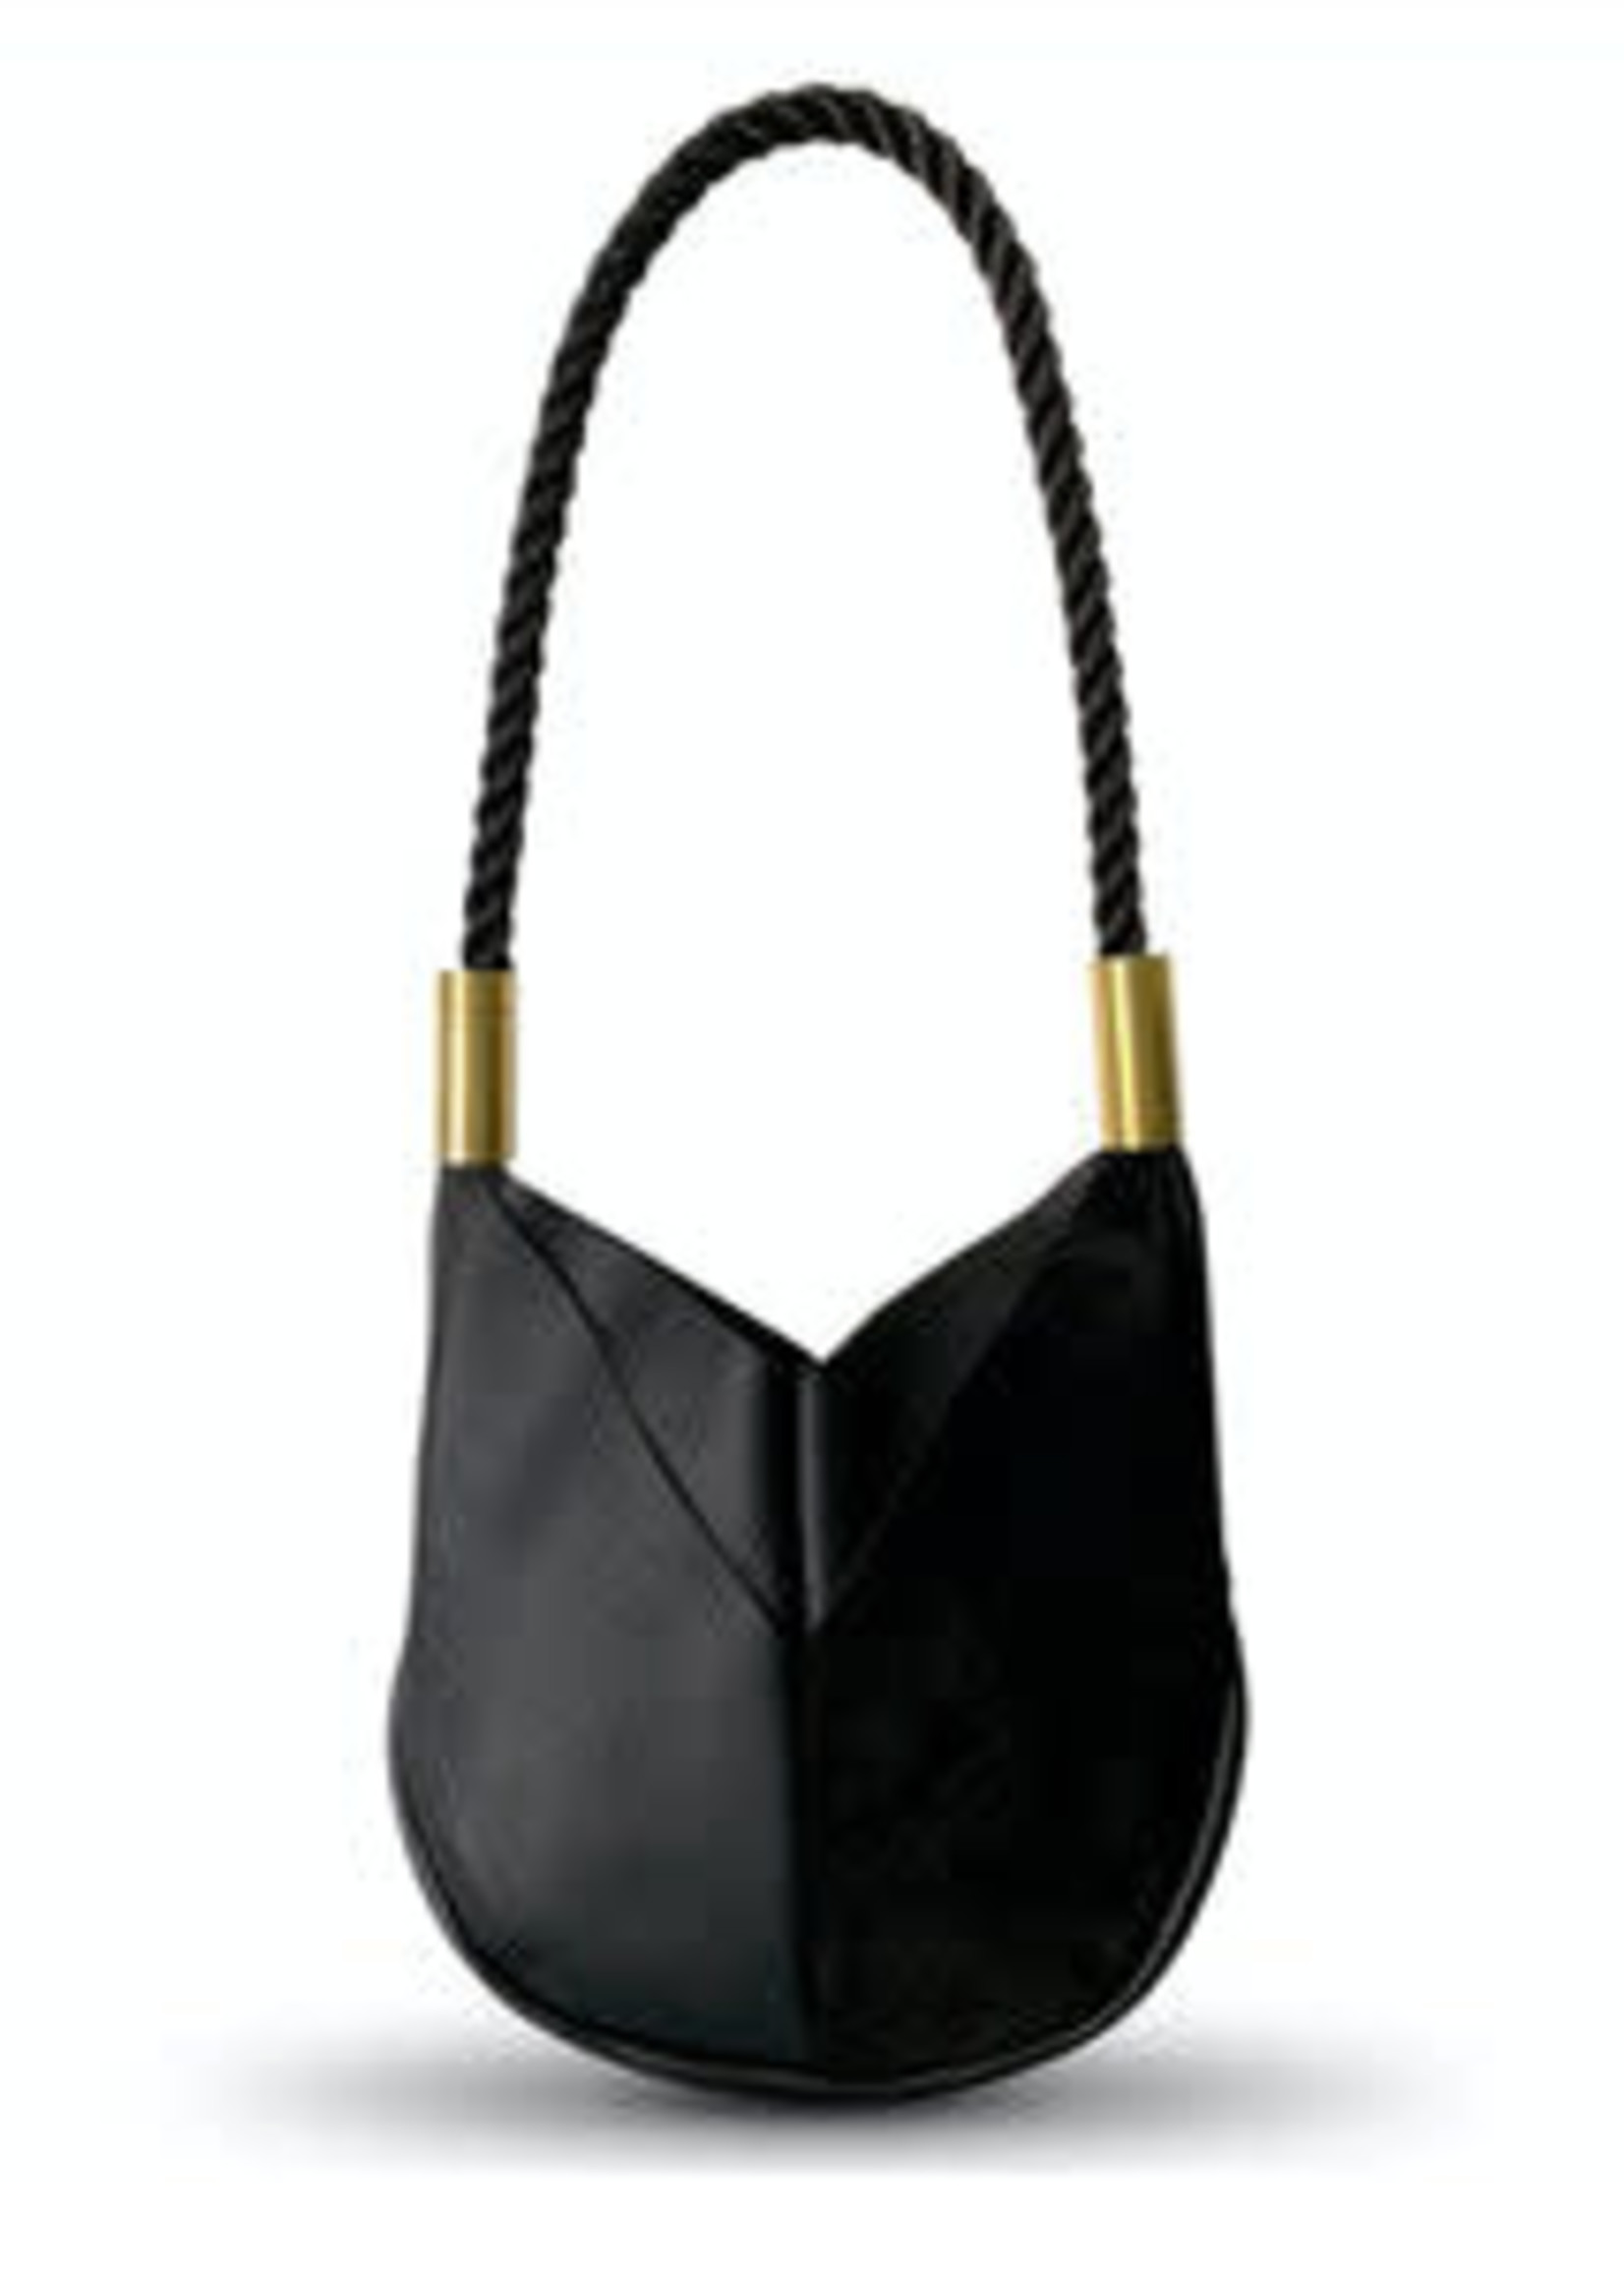 Wildwood Oyster Co. Black Leather Crossbody